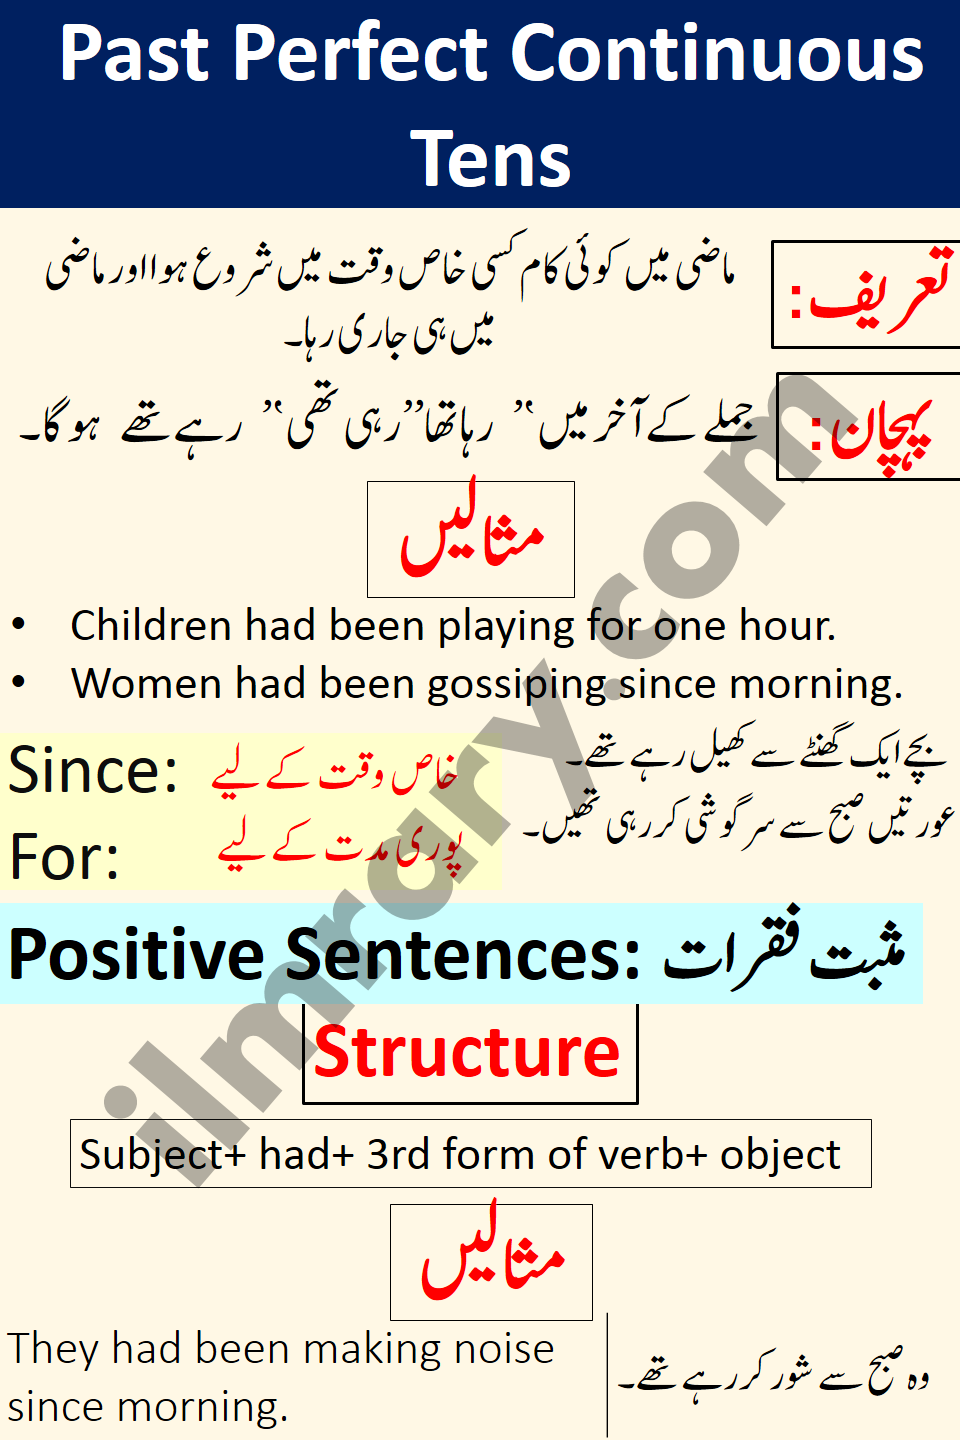 Positive Examples for Past Perfect Continuous Tense in Urdu